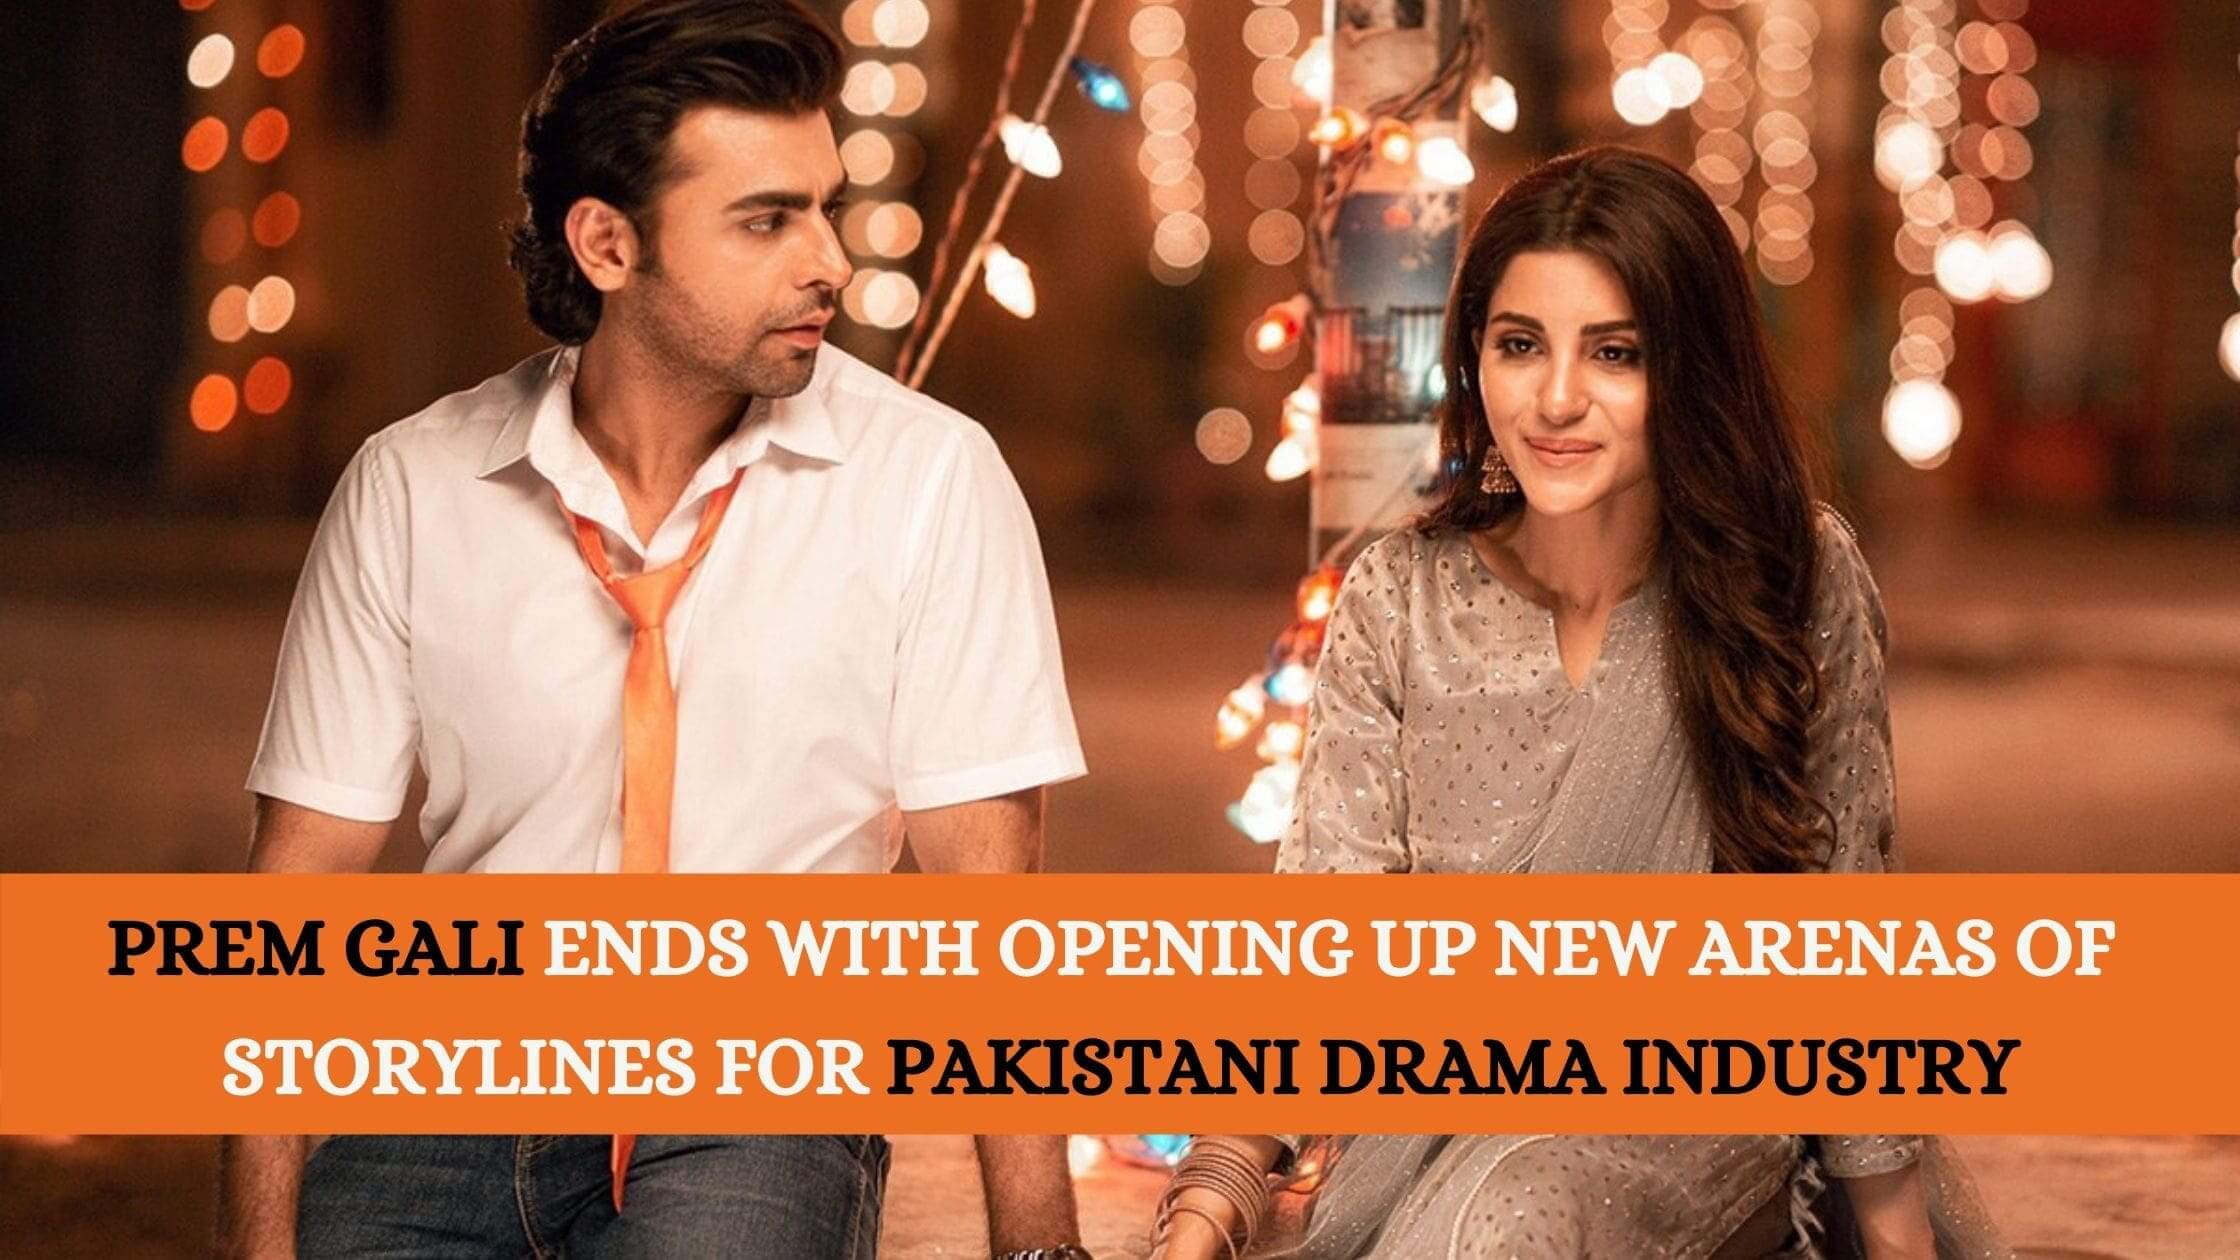 Prem Gali Ends with Opening New Arenas of Storylines for Pakistani Drama Industry